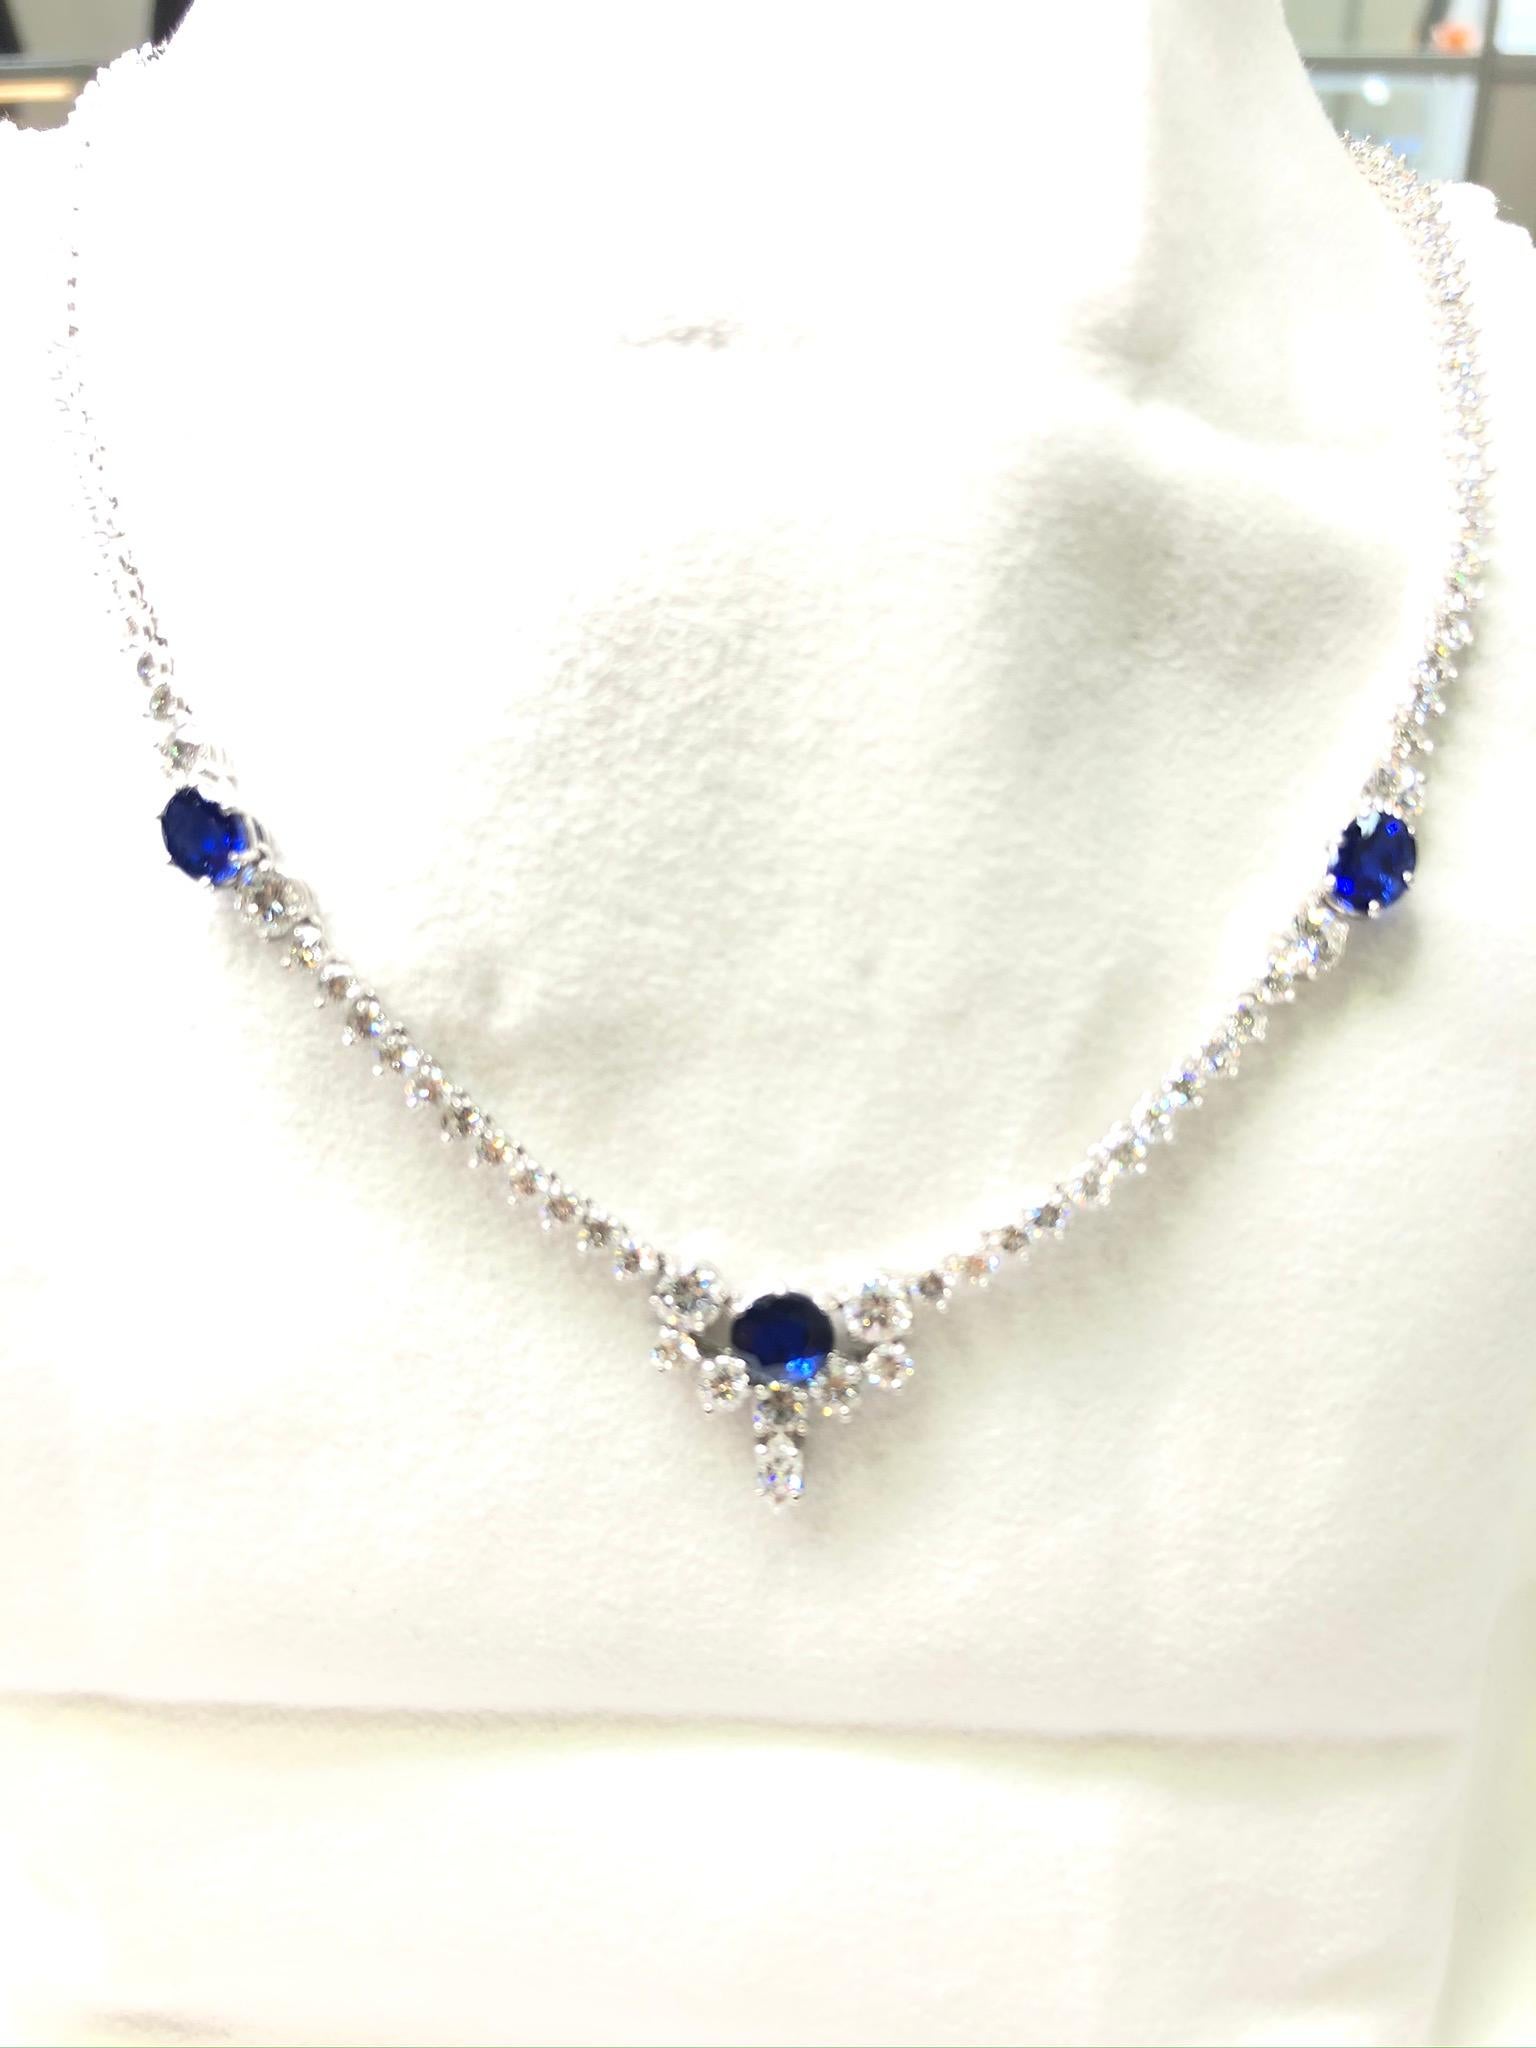 This necklace is fashioned out of 18 karat white gold and is set with approximately 6.44 carats of sapphires and 144 diamonds. Gross weight is approximately 16 grams. 